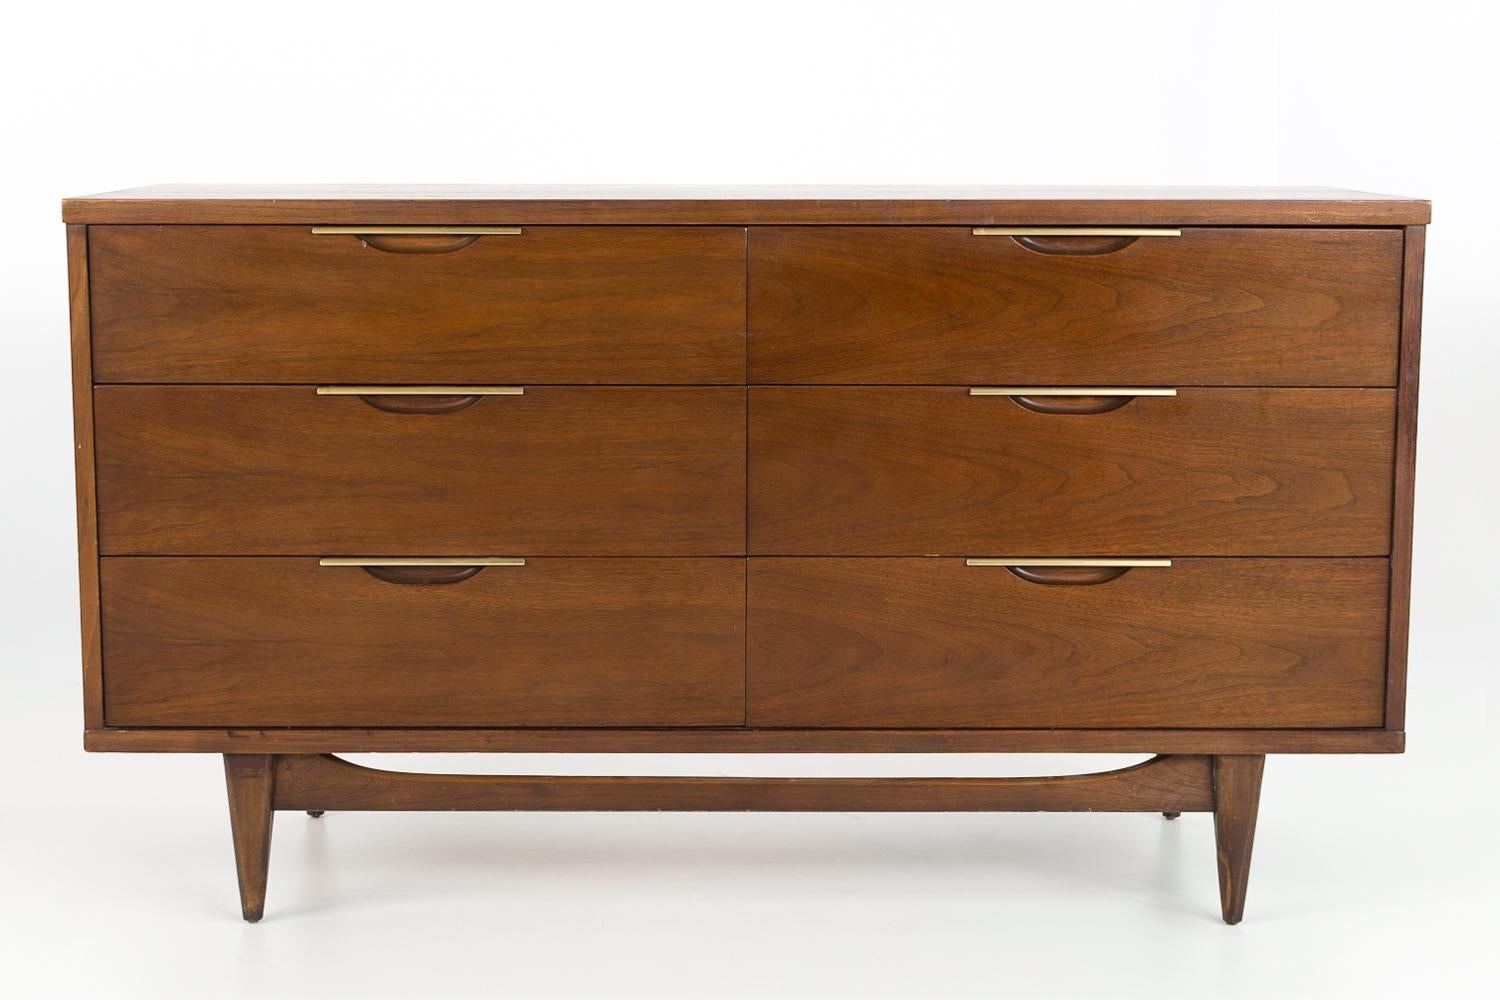 Kent Coffey Tableau Mid Century walnut 6 drawer Lowboy Dresser

This dresser measures: 56 wide x 19 deep x 31.25 inches high

All pieces of furniture can be had in what we call restored vintage condition. That means the piece is restored upon